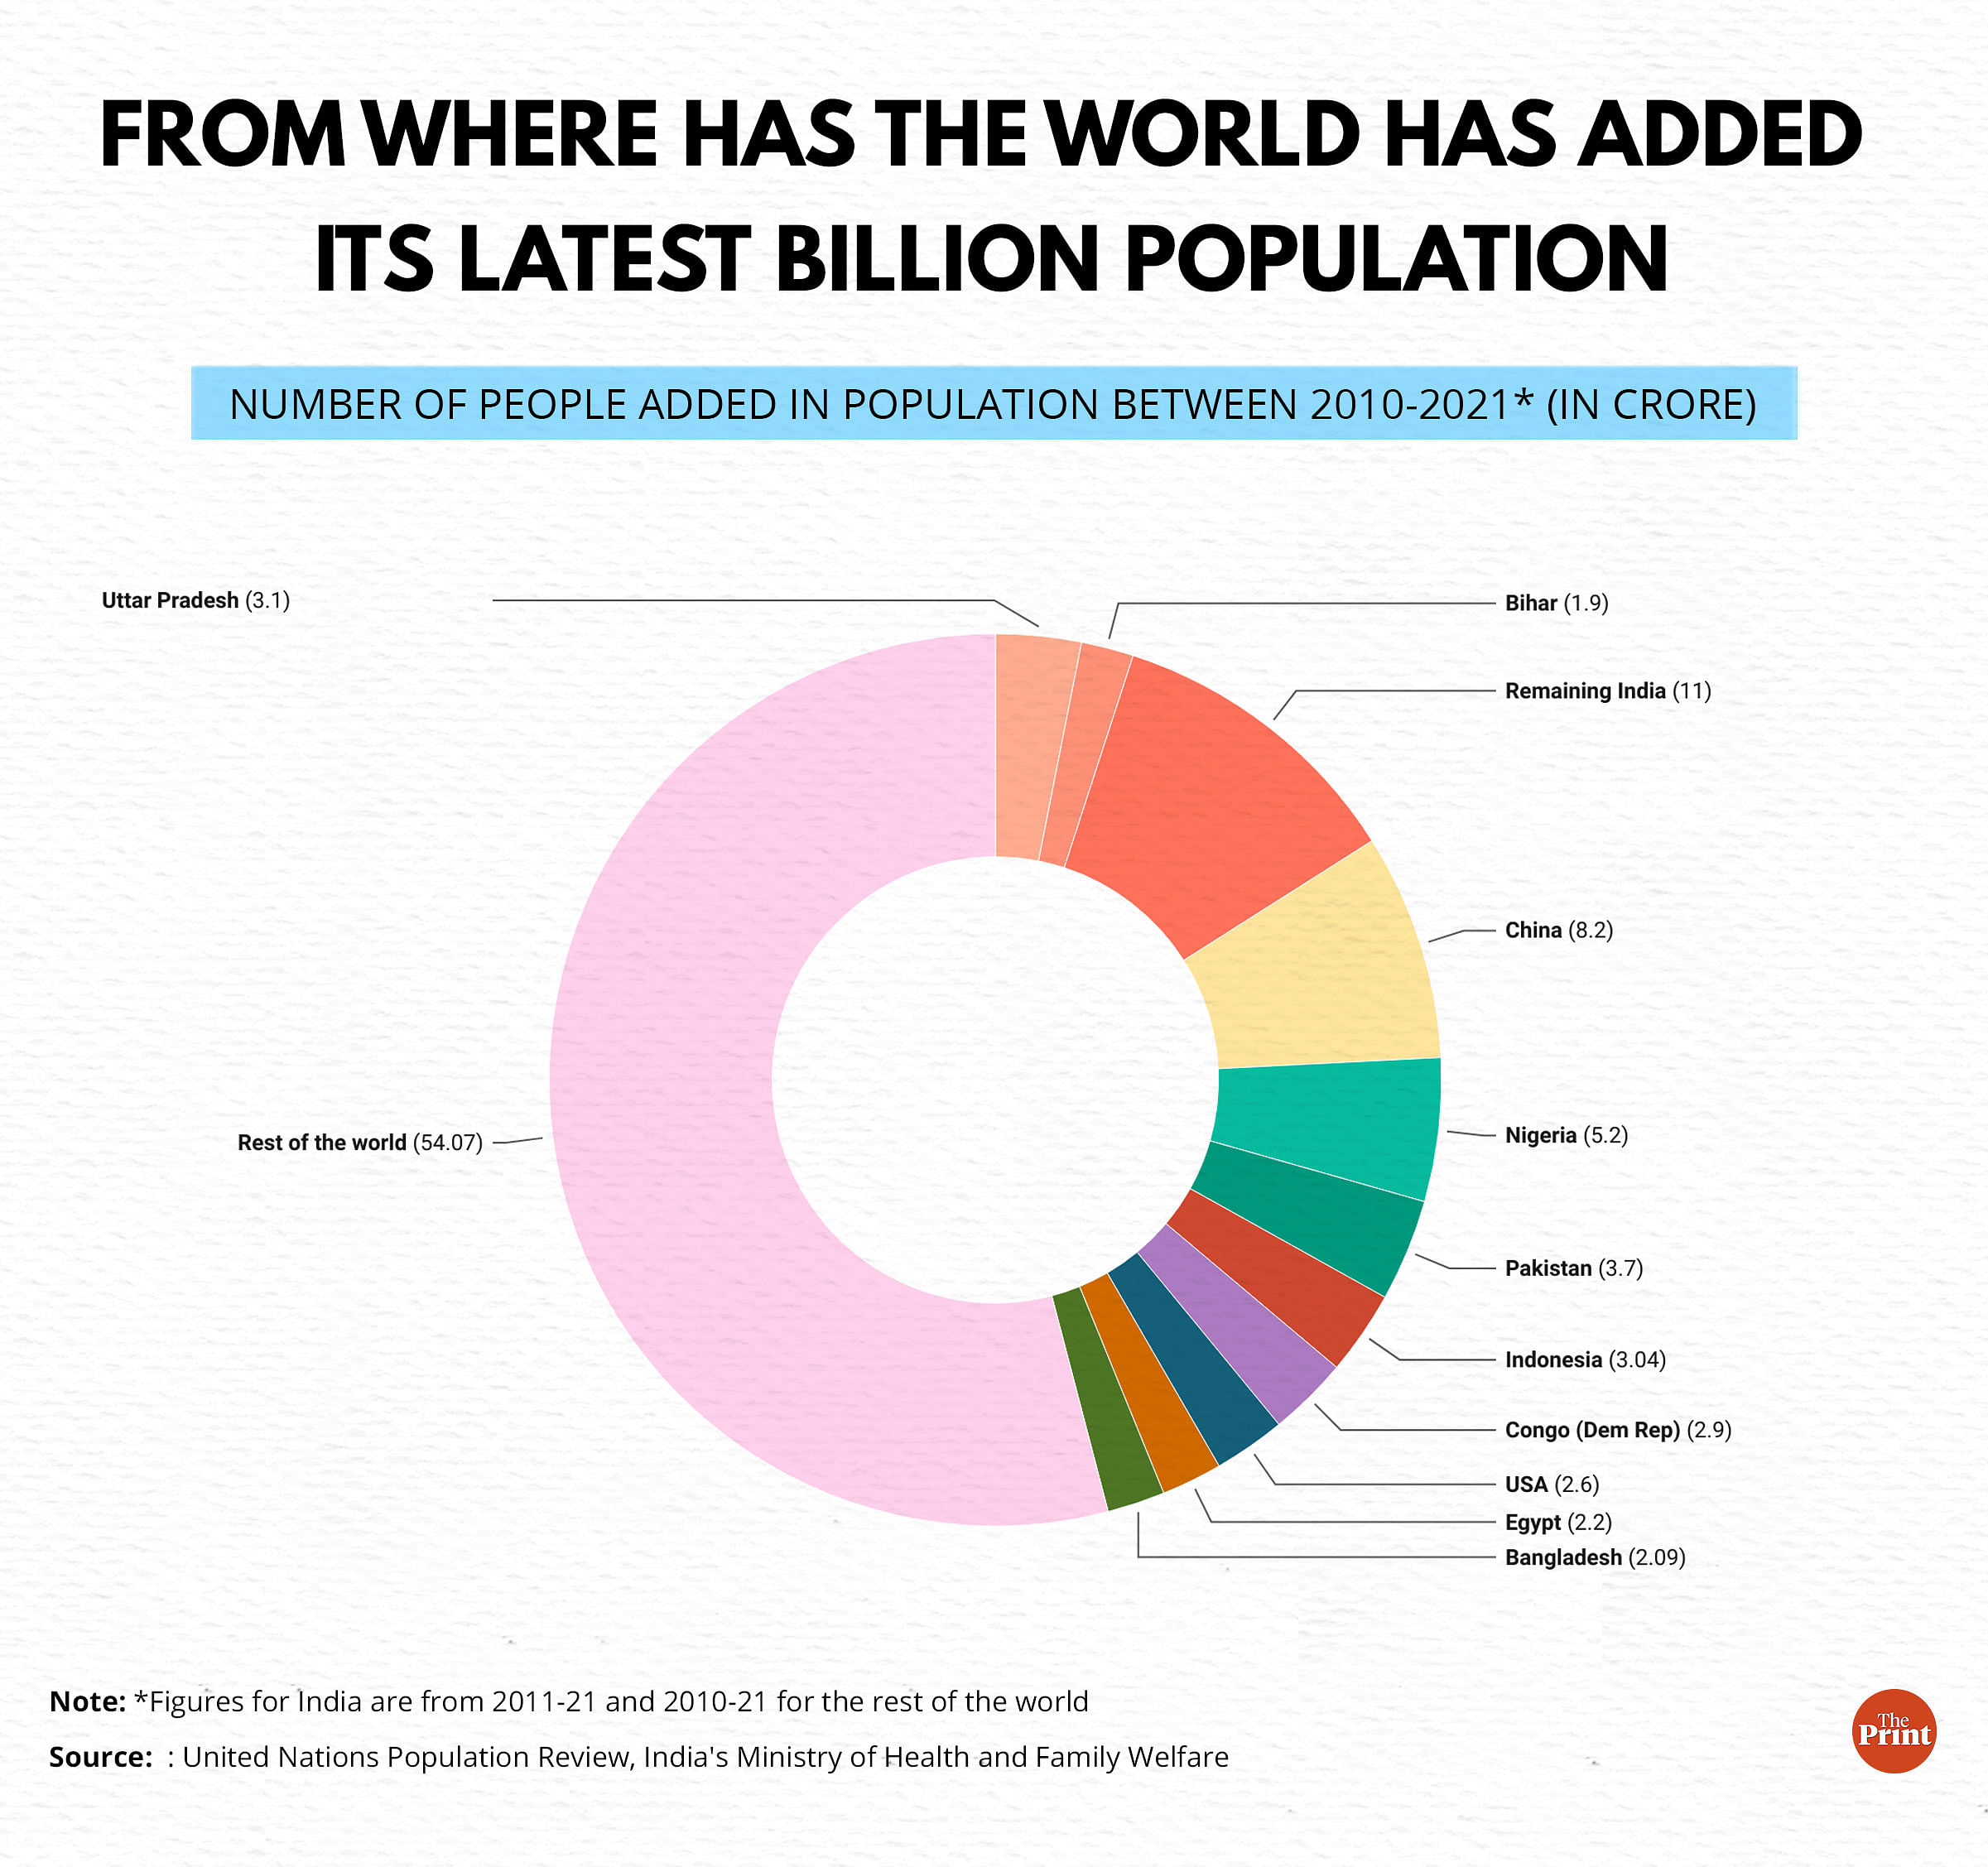 World population grew by a billion in past 12 yrs & 5 came from just UP & Bihar, data shows